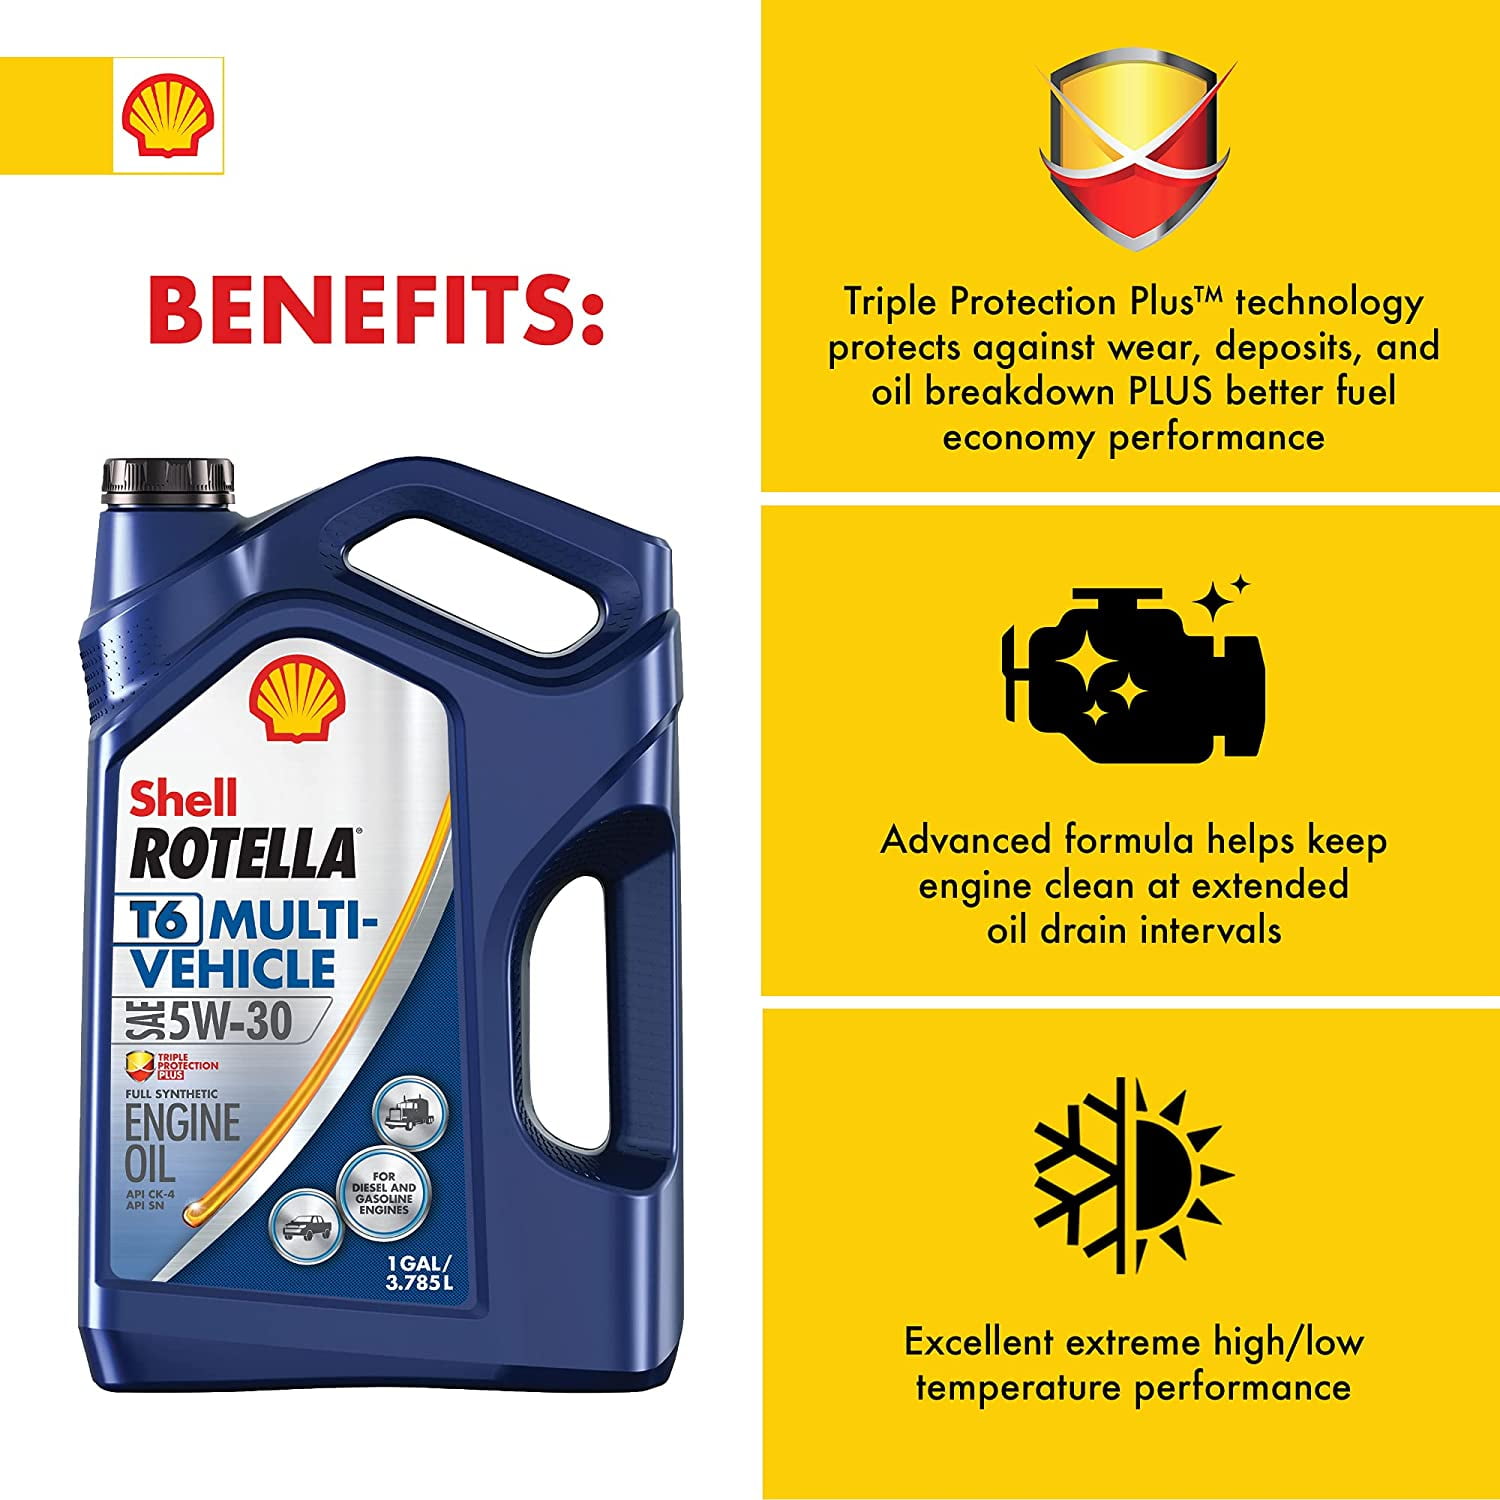 Shell Rotella T6 Multi-Vehicle Full Synthetic 5W-30 Diesel Engine Oil, 1 Gallon - 1